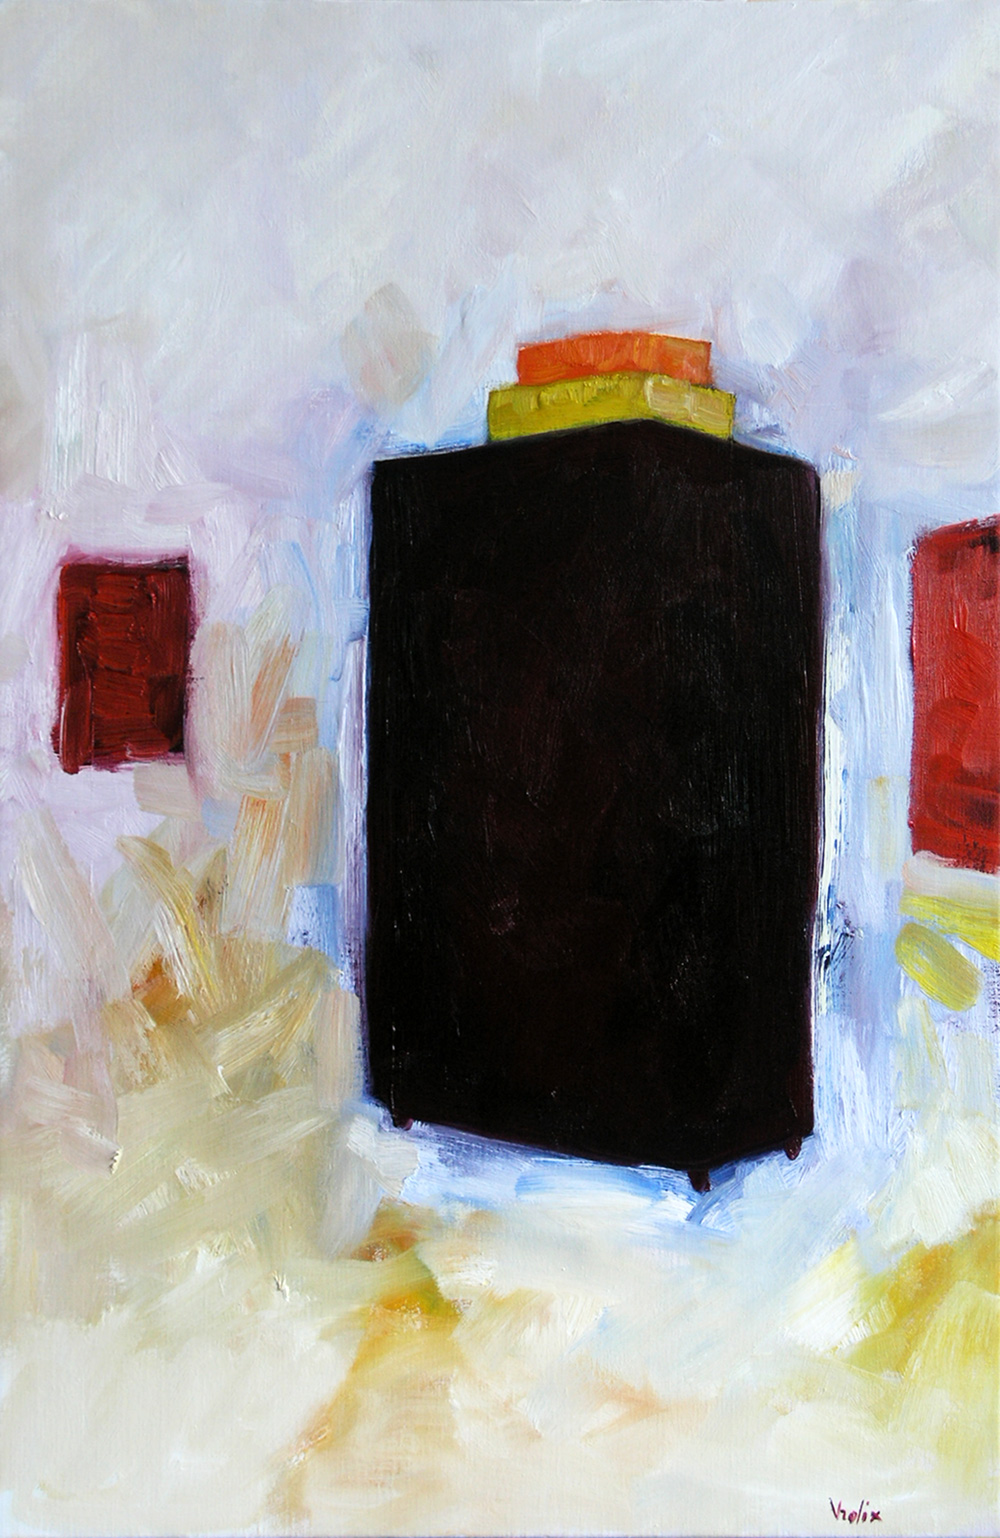 Boxes, a painting by Guido Vrolix